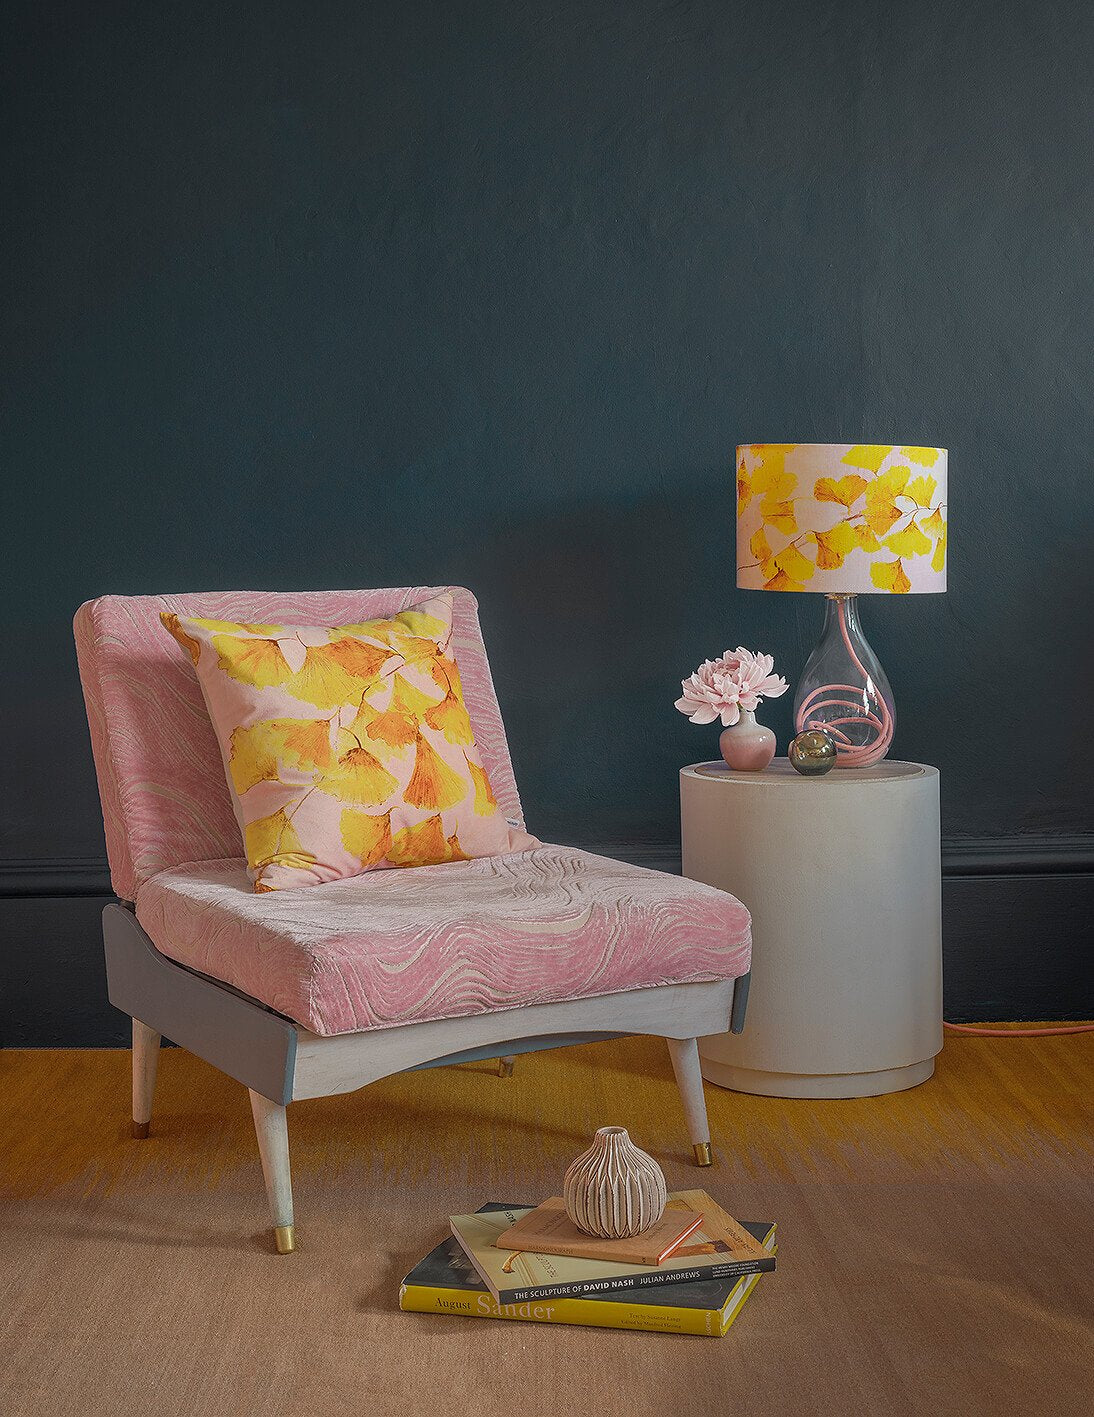 Ginkgo in Sunshine yellow velvet cushion and glass lamp with Rose flex, designed by Anna Jacobs, in a living room lifestyle setting